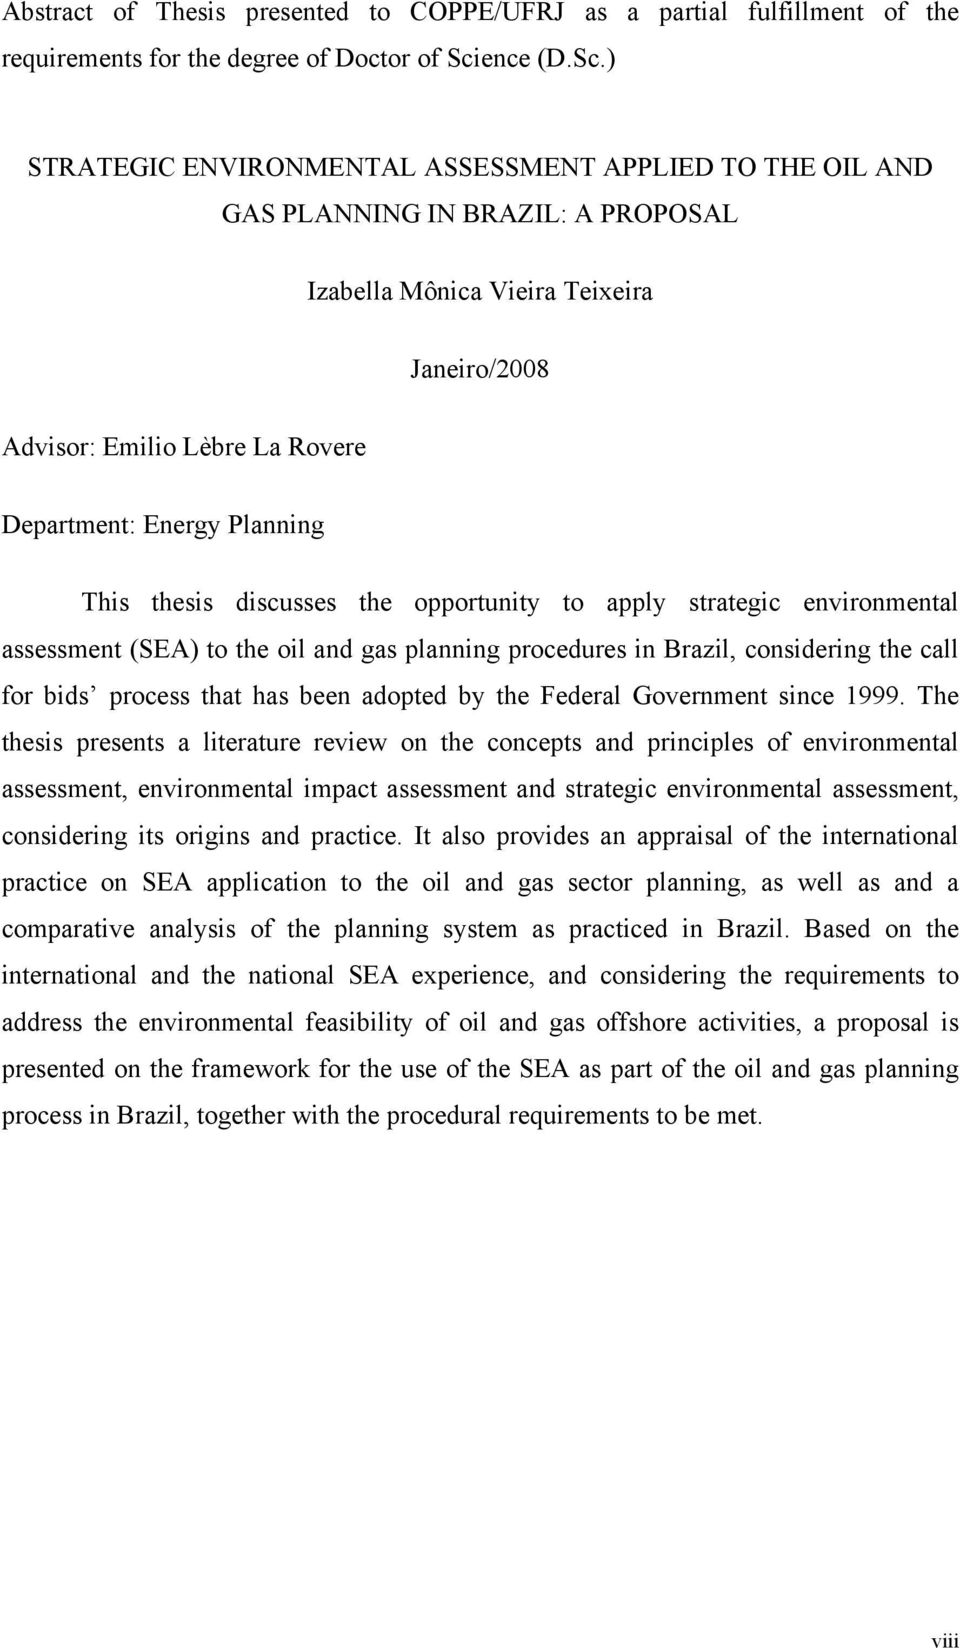 ) STRATEGIC ENVIRONMENTAL ASSESSMENT APPLIED TO THE OIL AND GAS PLANNING IN BRAZIL: A PROPOSAL Izabella Mônica Vieira Teixeira Janeiro/2008 Advisor: Emilio Lèbre La Rovere Department: Energy Planning